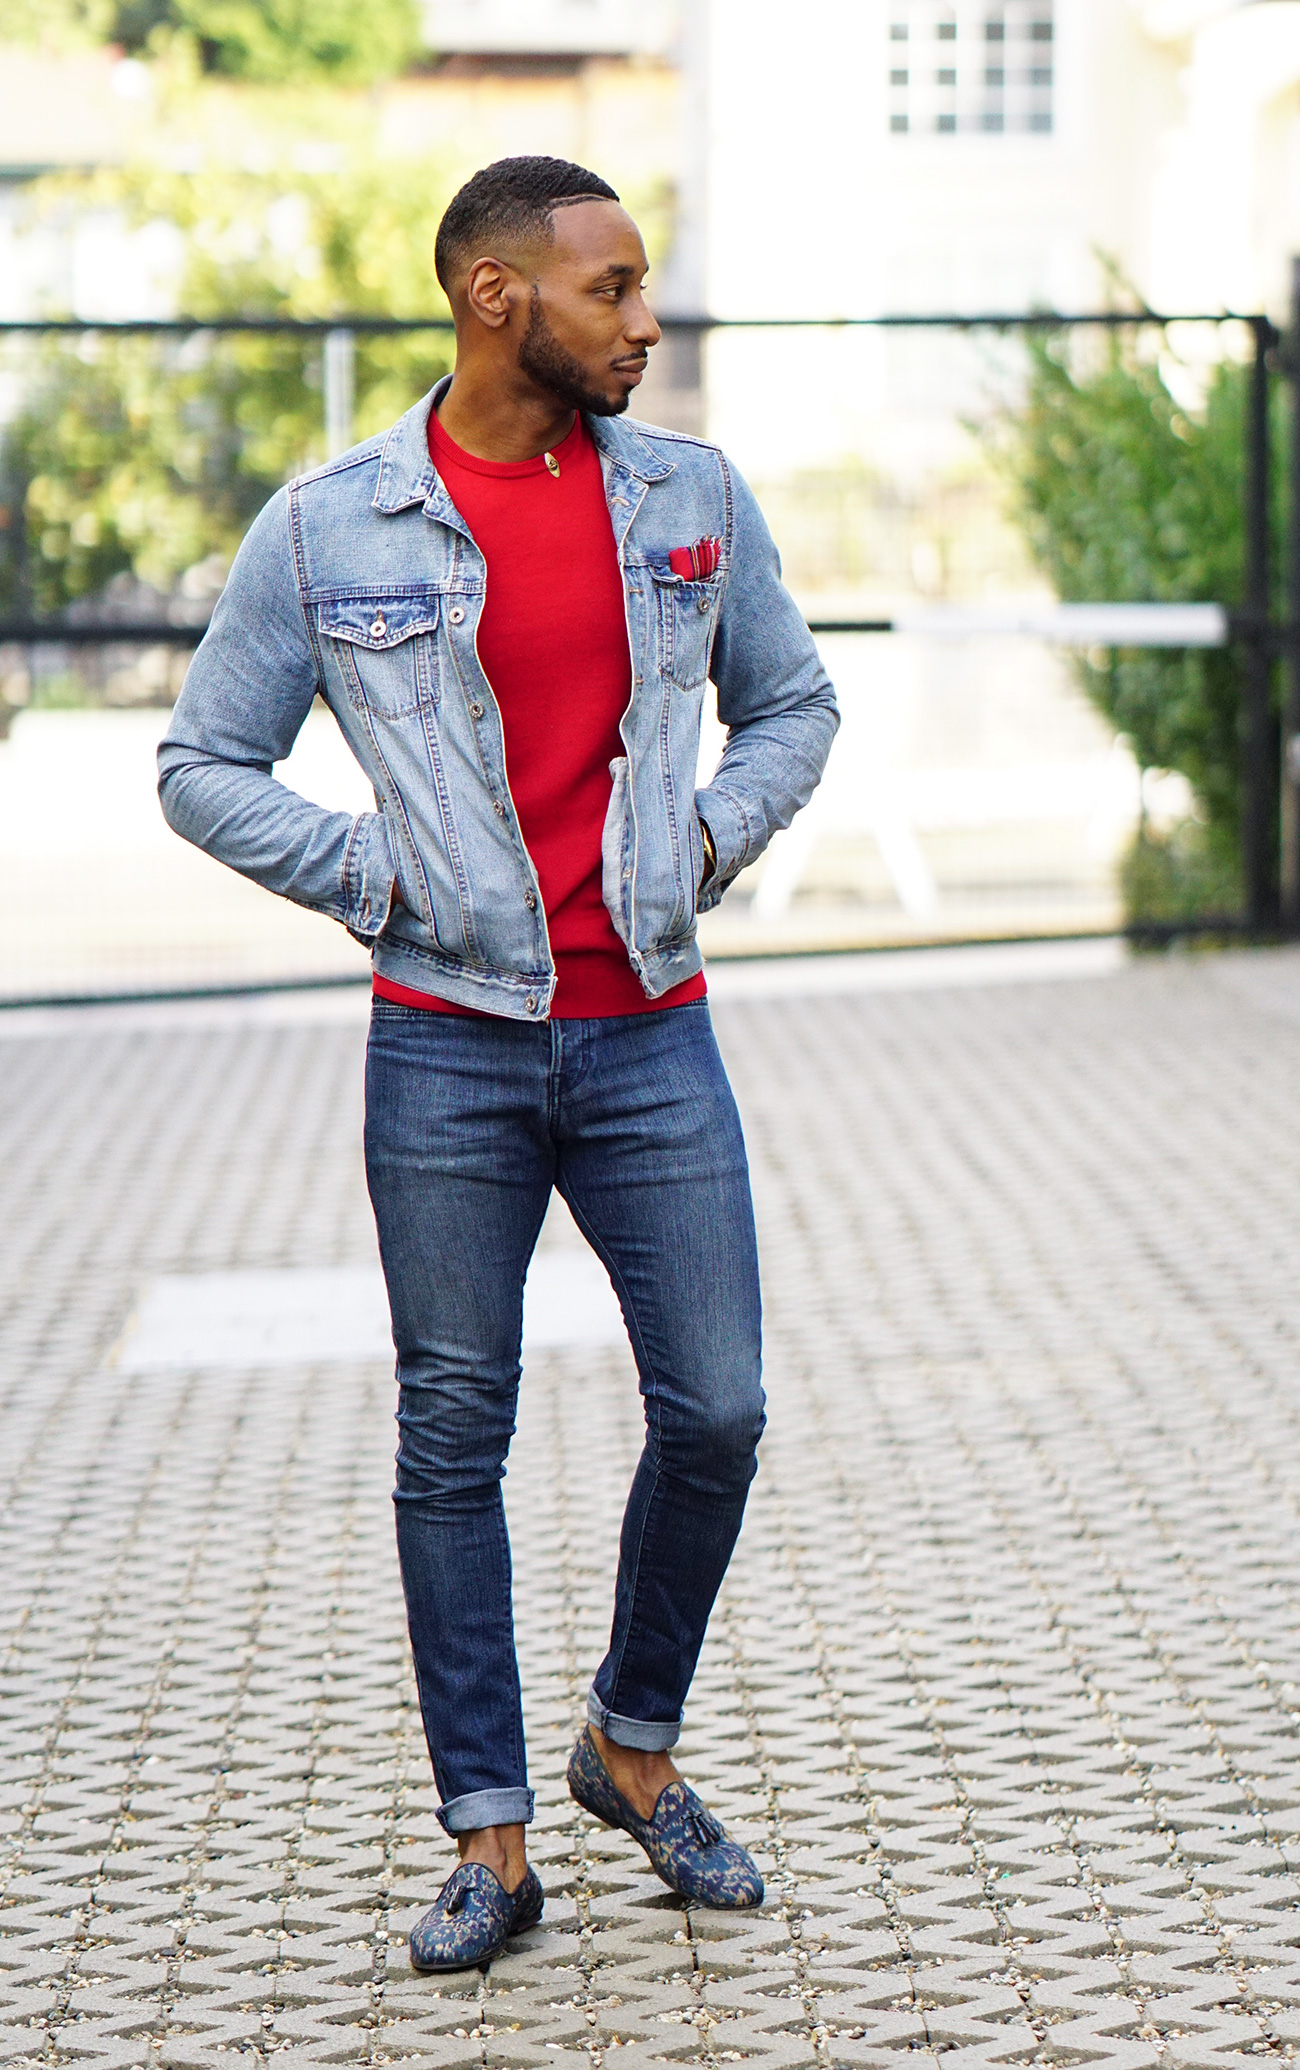 OOTD: CASUAL DENIM OUTFIT WITH LOAFERS – Norris Ford